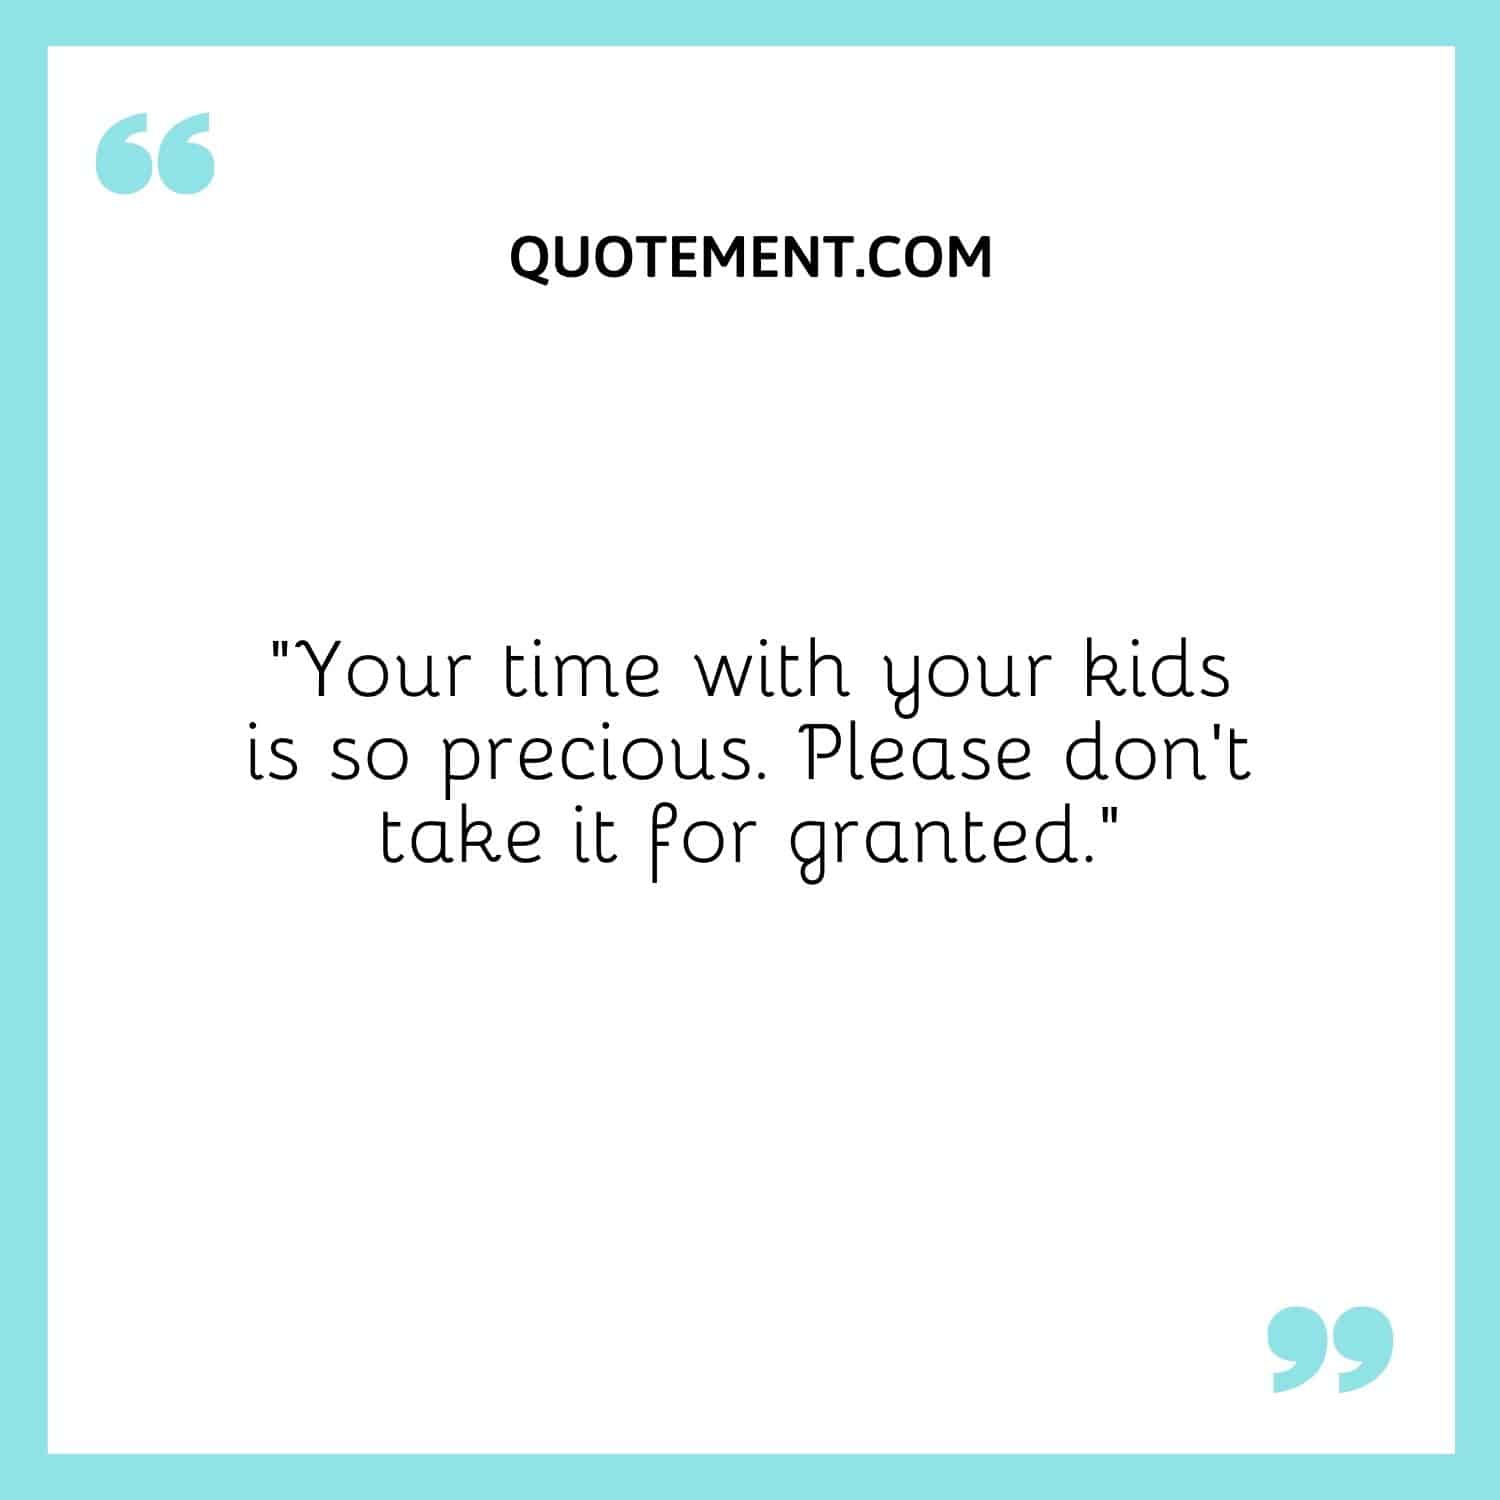 Your time with your kids is so precious